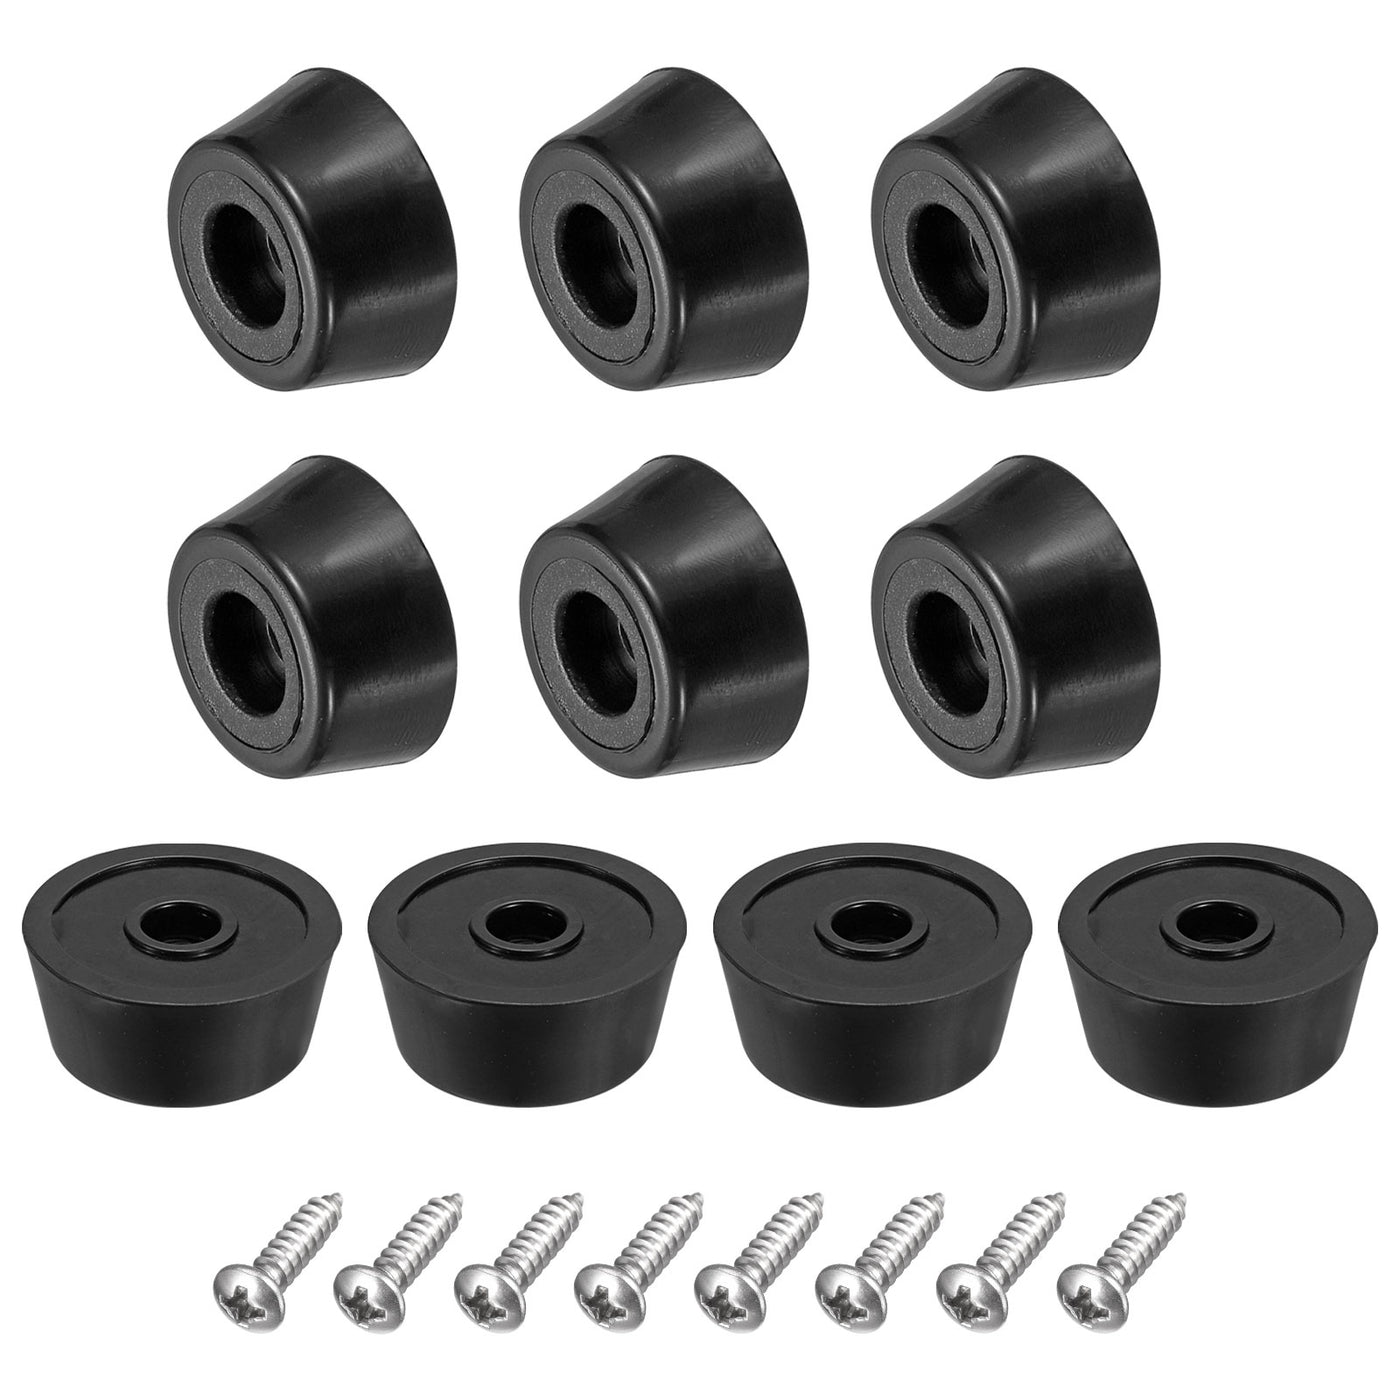 uxcell Uxcell 10Pcs Rubber Bumper Feet, 0.39" H x 0.87" W Round Pads with Stainless Steel Washer and Screws for Furniture, Appliances, Electronics